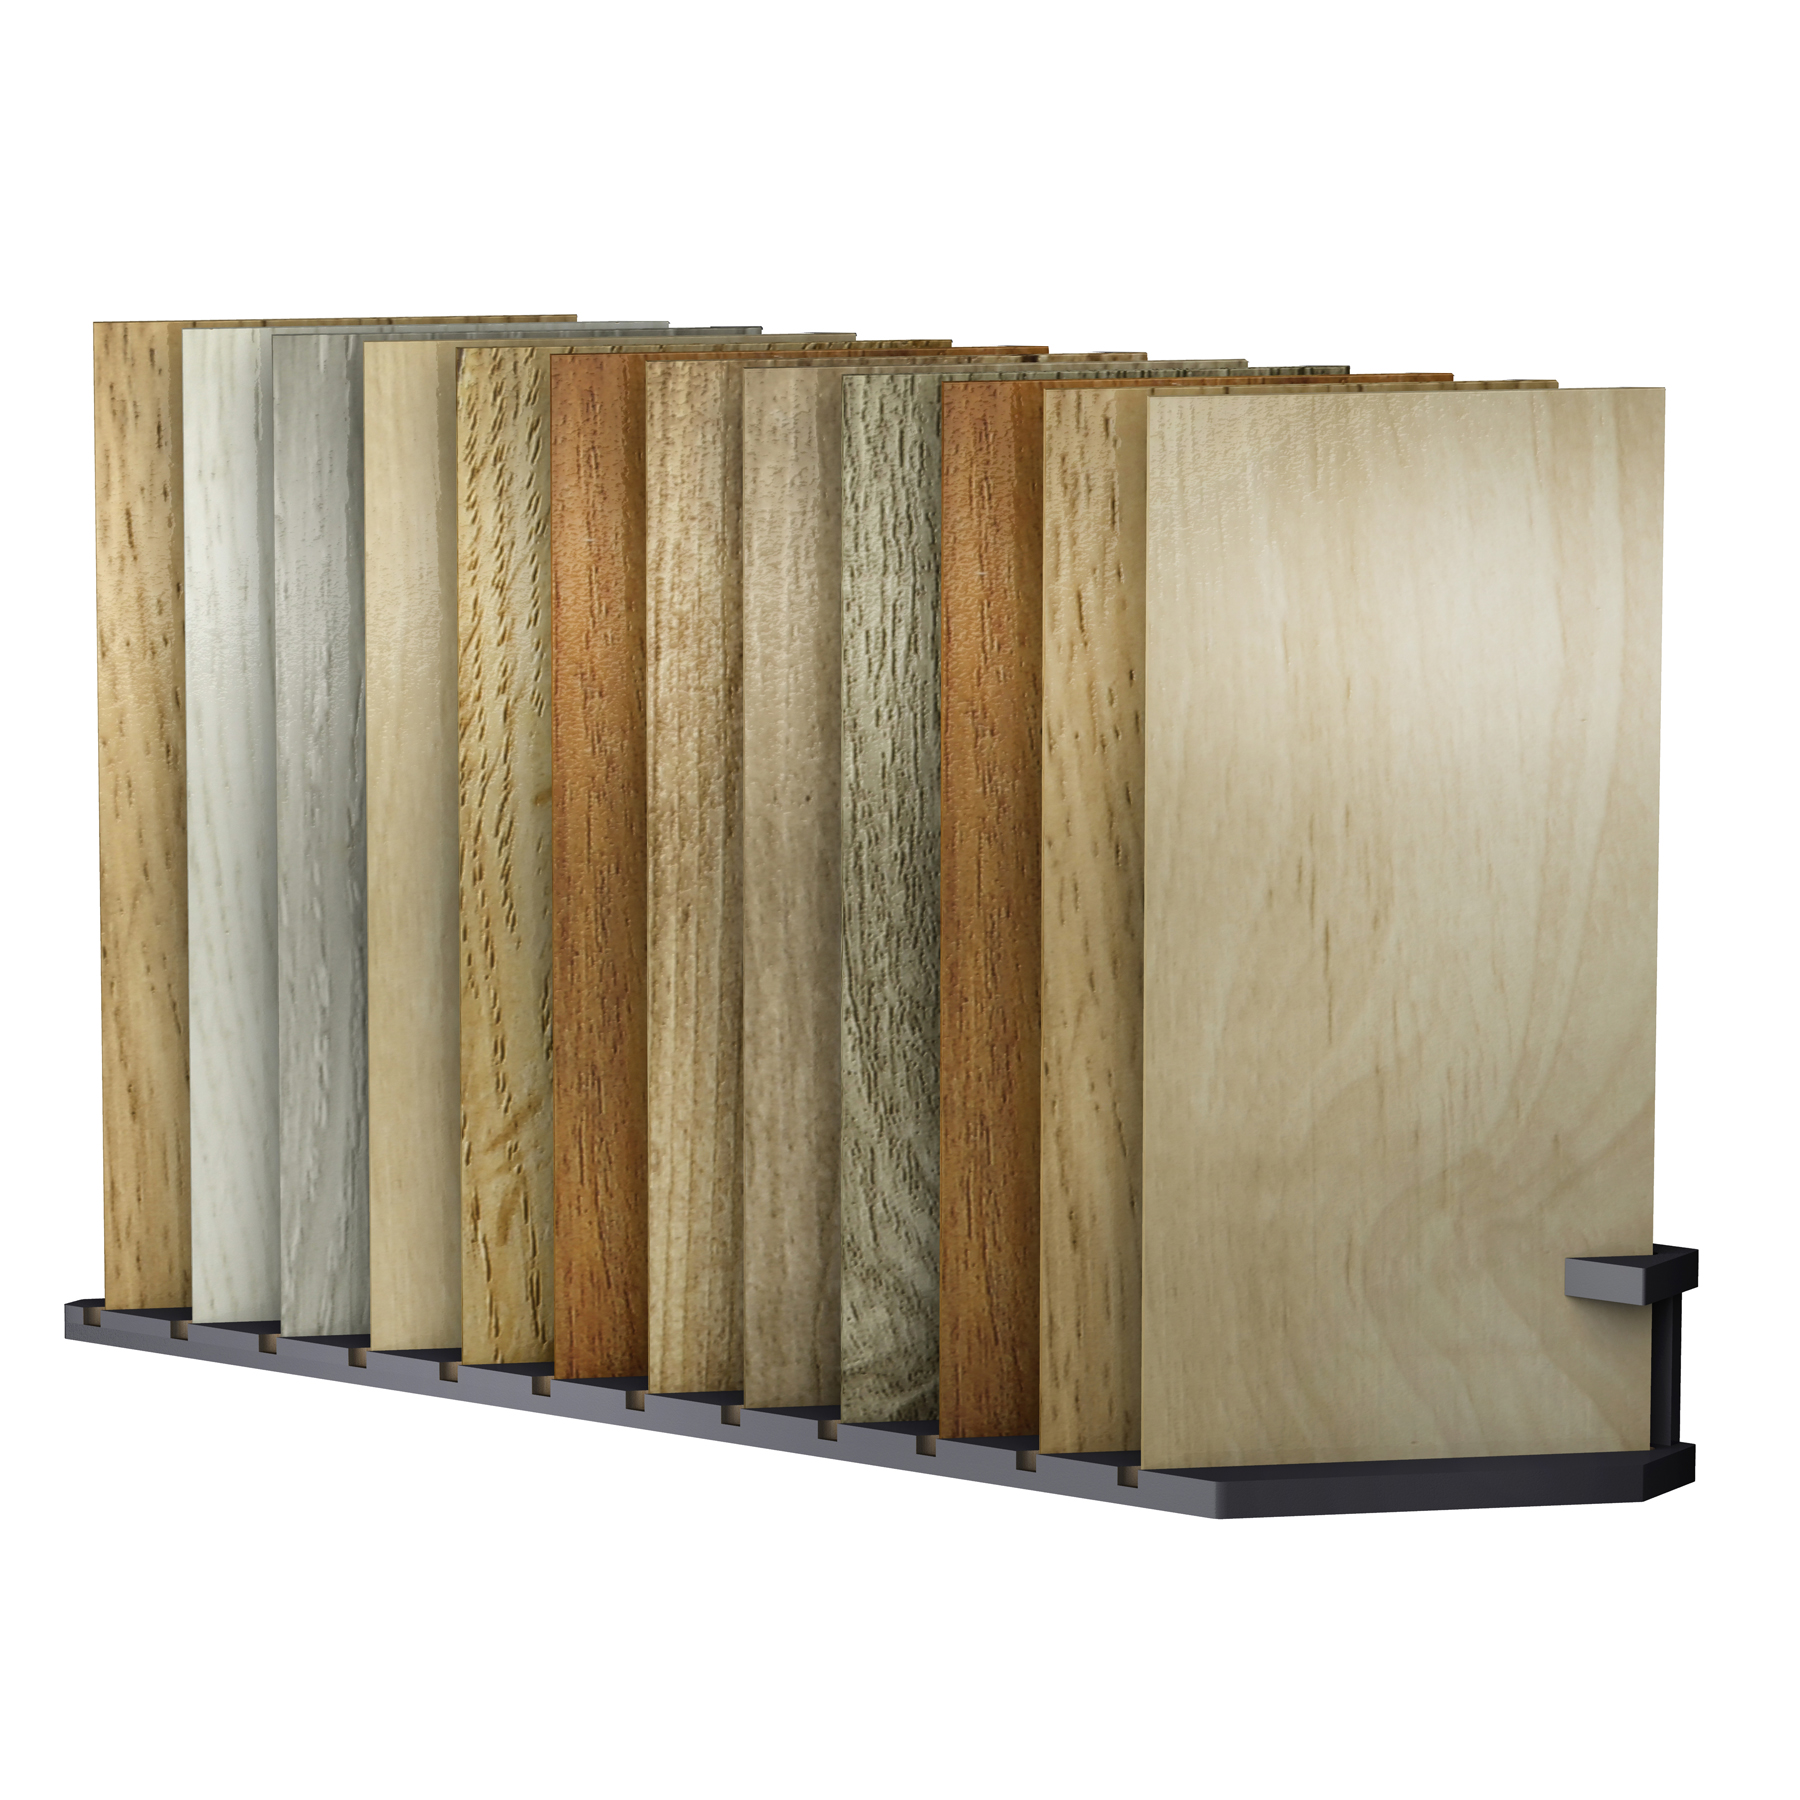 CD100 Floor Stand Display Has Slots for Hardwood Samples Holds Securely